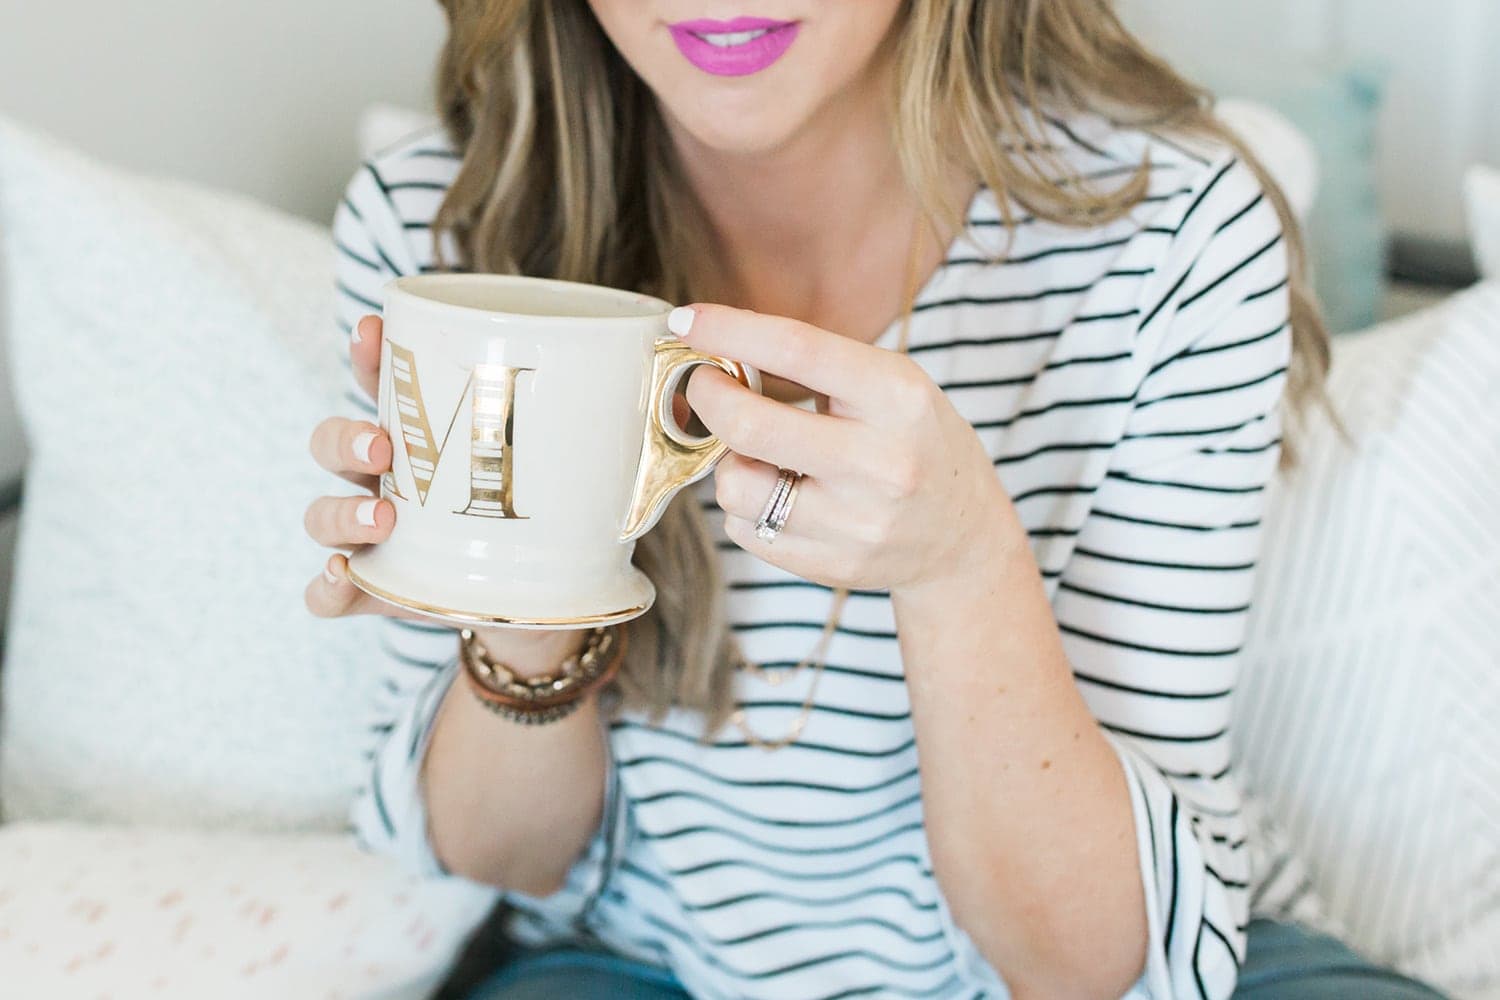 Houston Blogger Meg O. on the Go shares tips on how to stay motivated